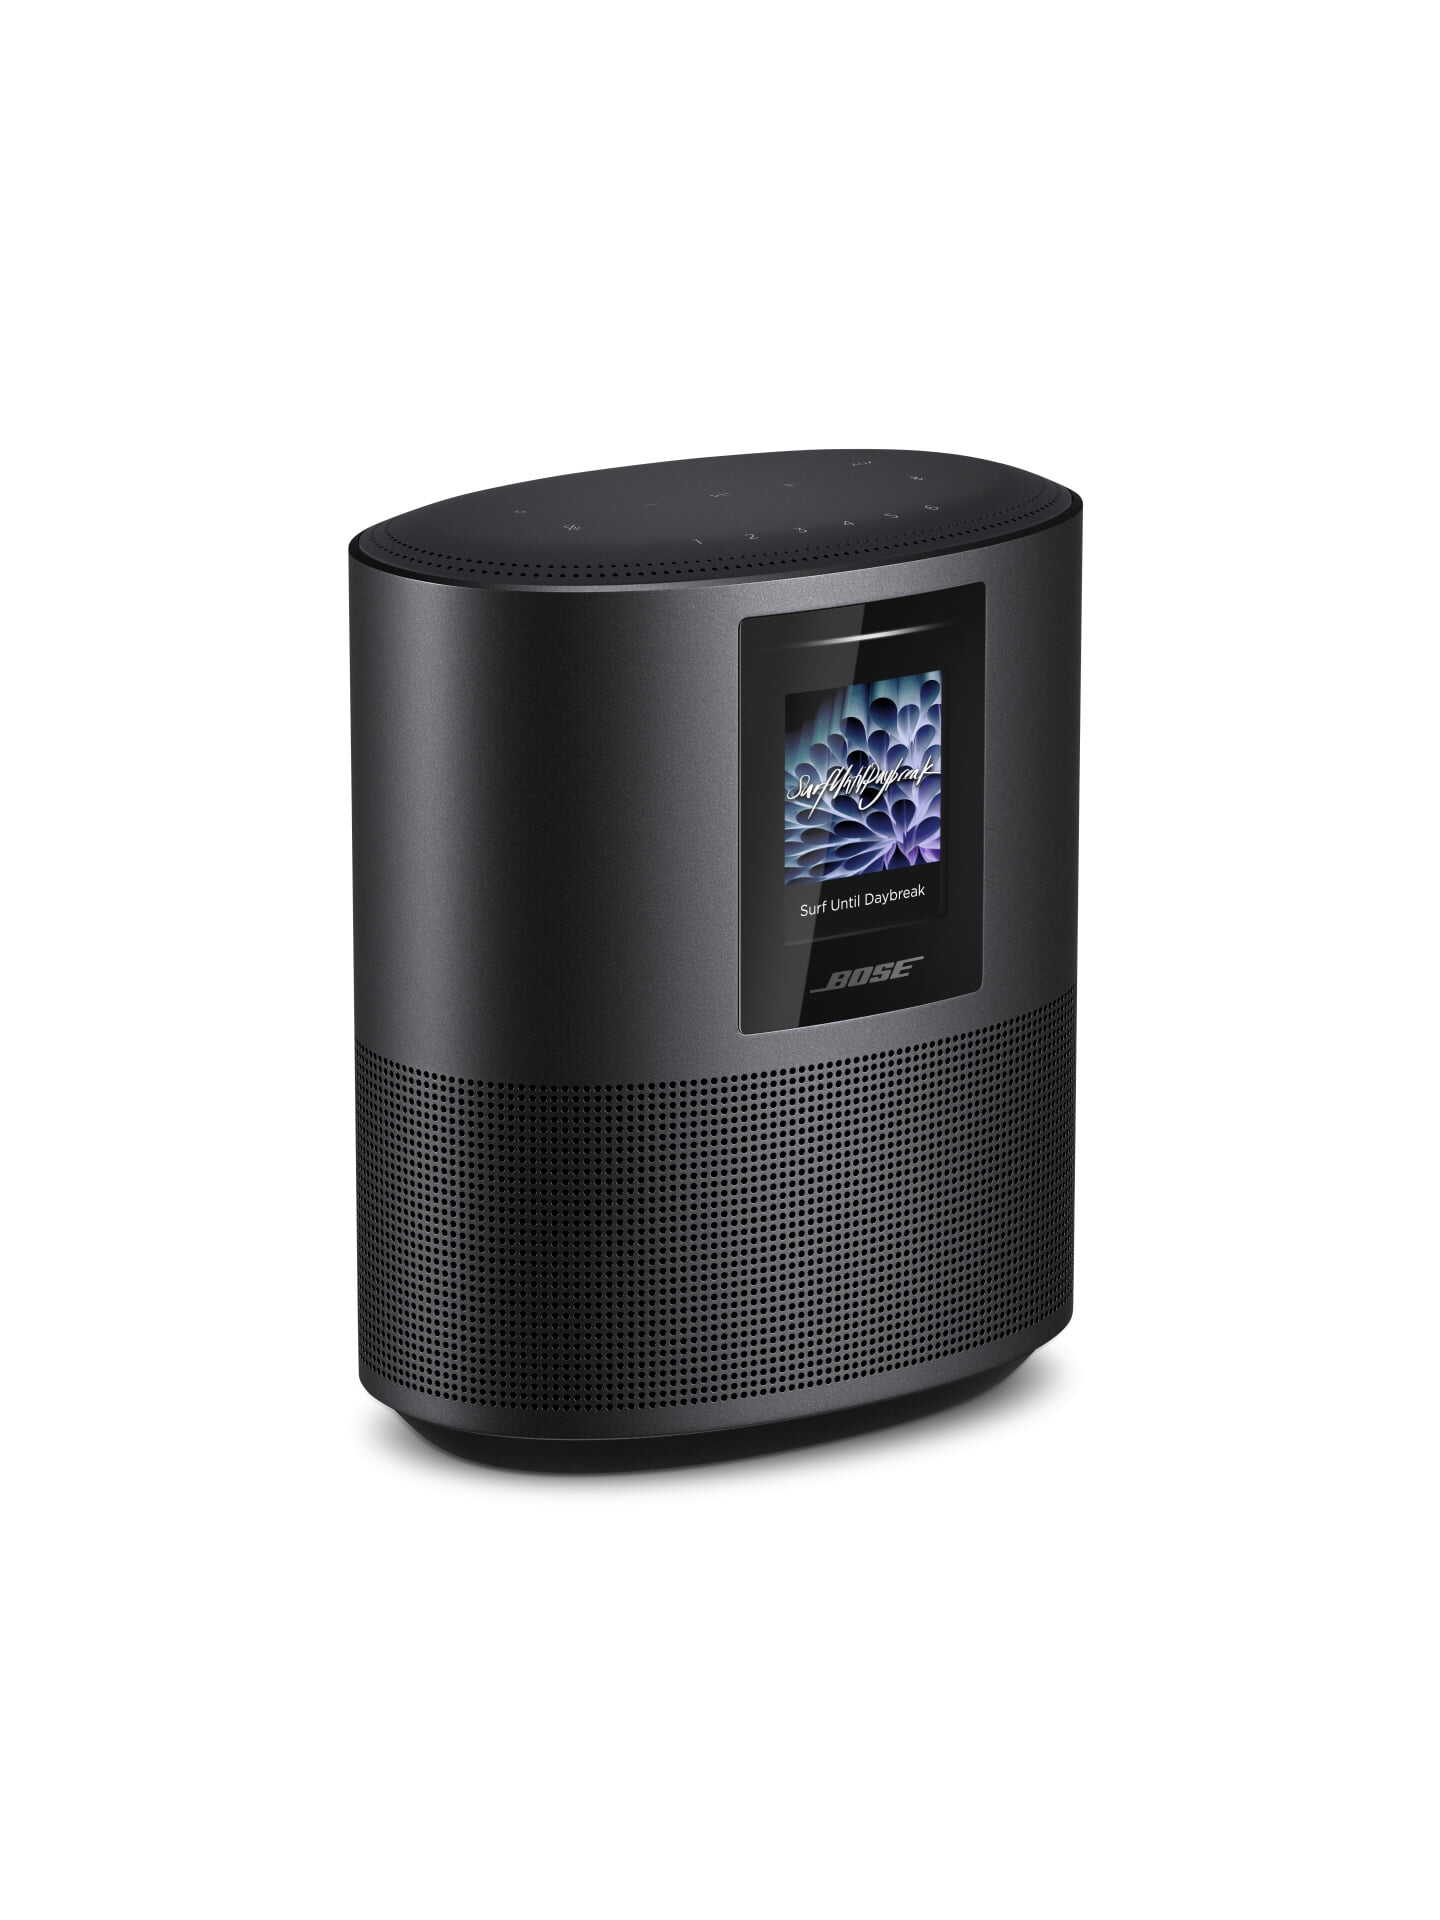 Bose Smart Speaker 500 with Wi-Fi, Bluetooth and Voice Control Built-in, Black